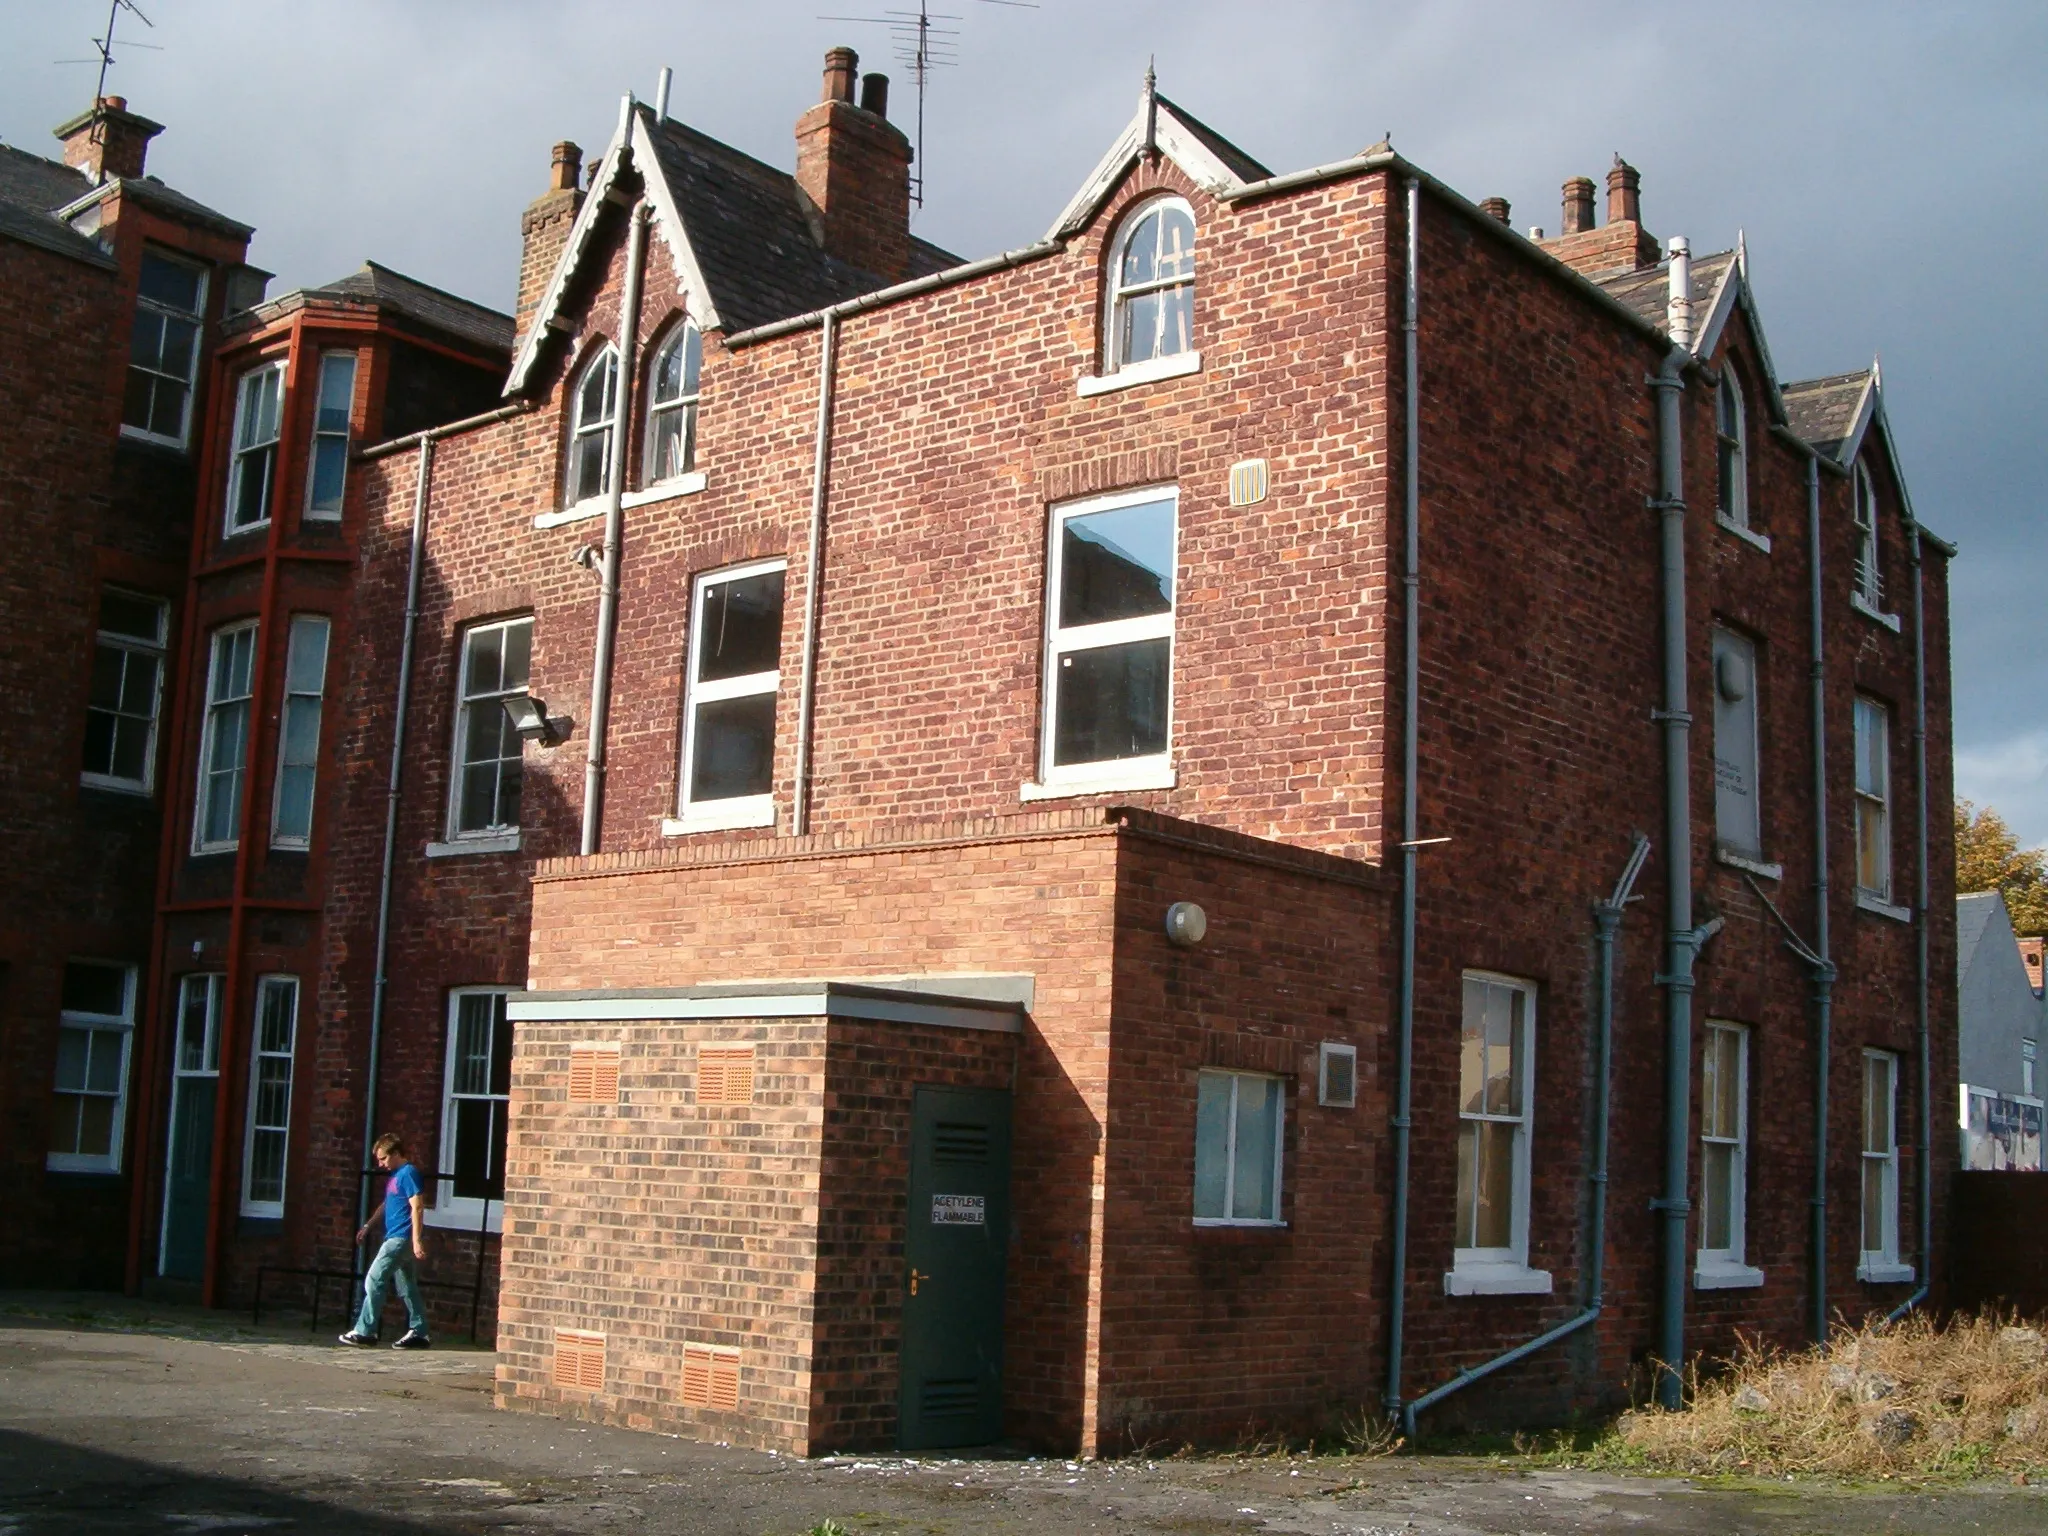 Photo showing: One of three campuses of the Cleveland College of Art & Design, on the corner of Burlam Road and Roman Road in Middlesbrough, England.

Taken by Gavin Lenaghan in October 2005.